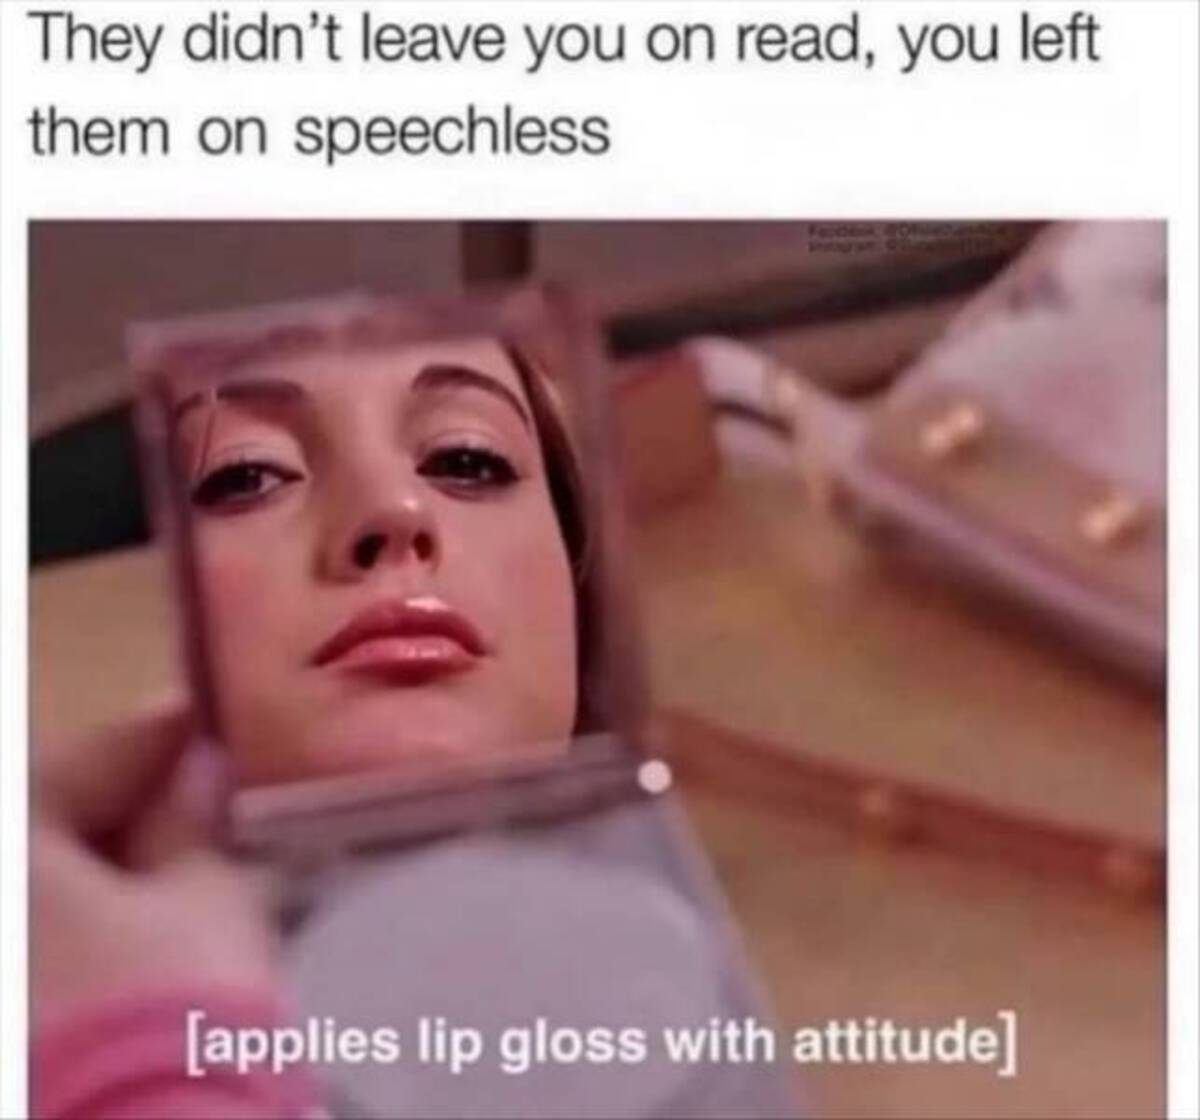 applies lip gloss with attitude - They didn't leave you on read, you left them on speechless applies lip gloss with attitude